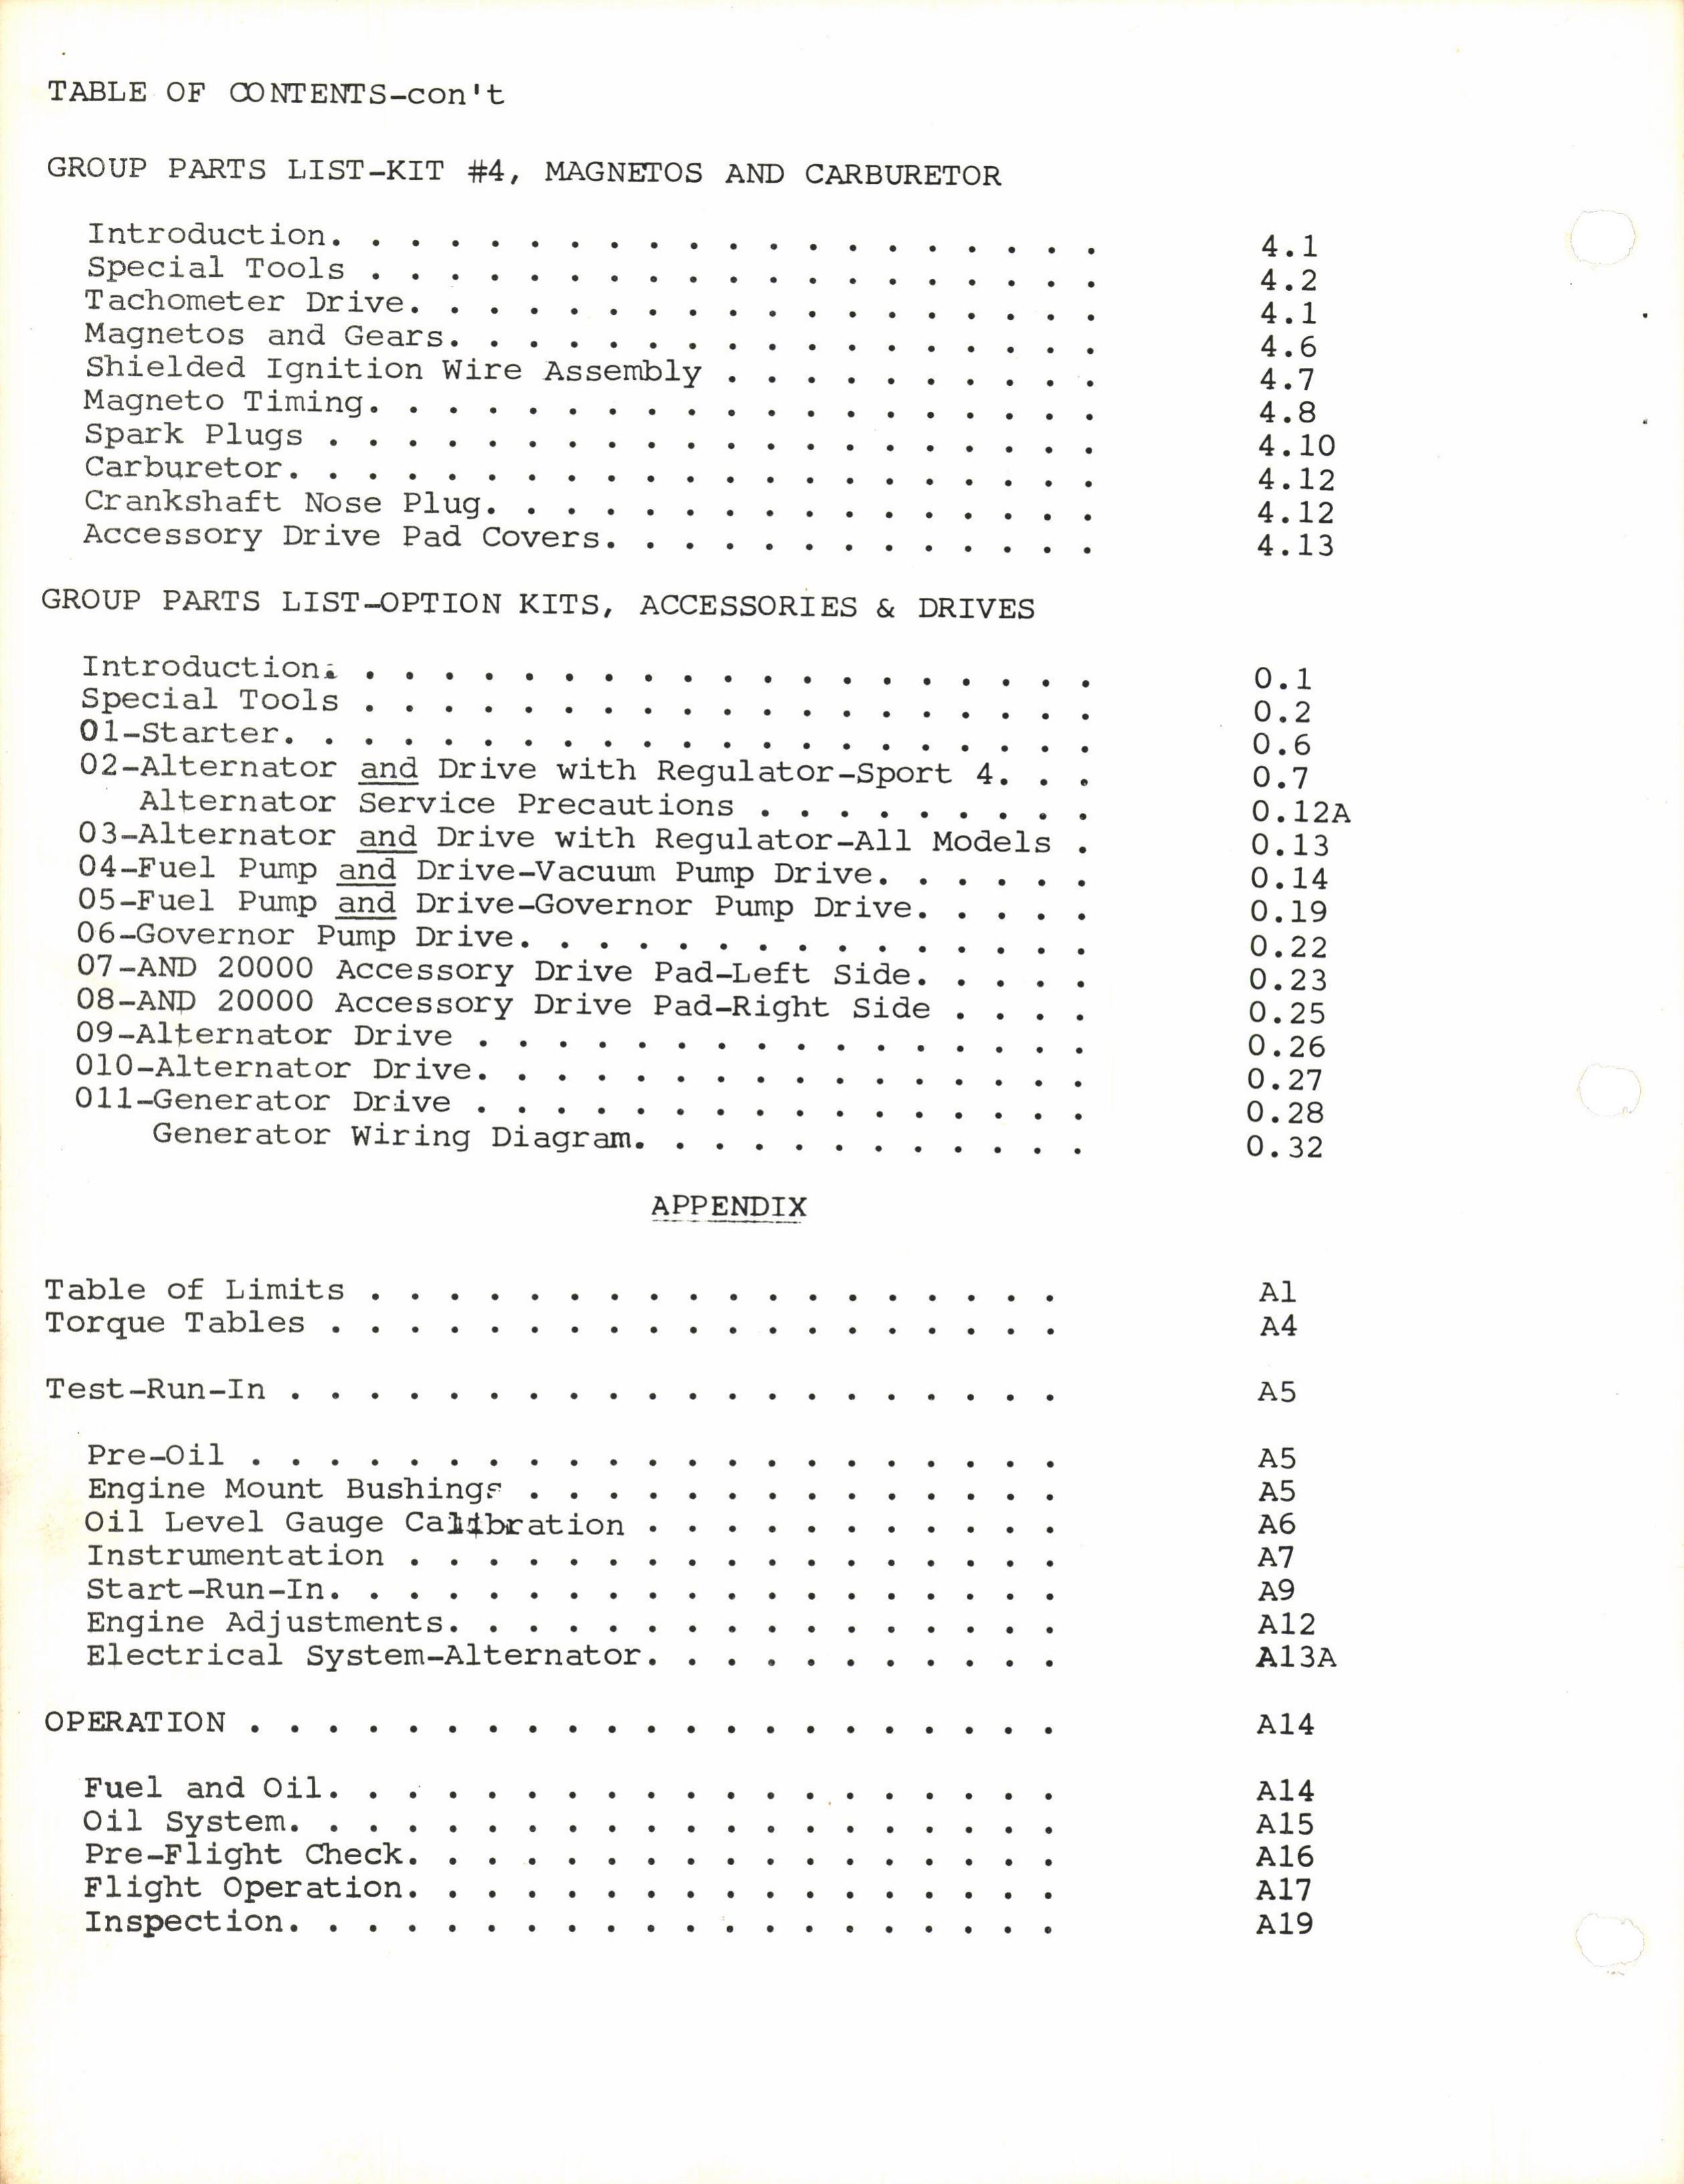 Sample page 6 from AirCorps Library document: Assembly Manual for Models Sport 4, 4A, and 4B